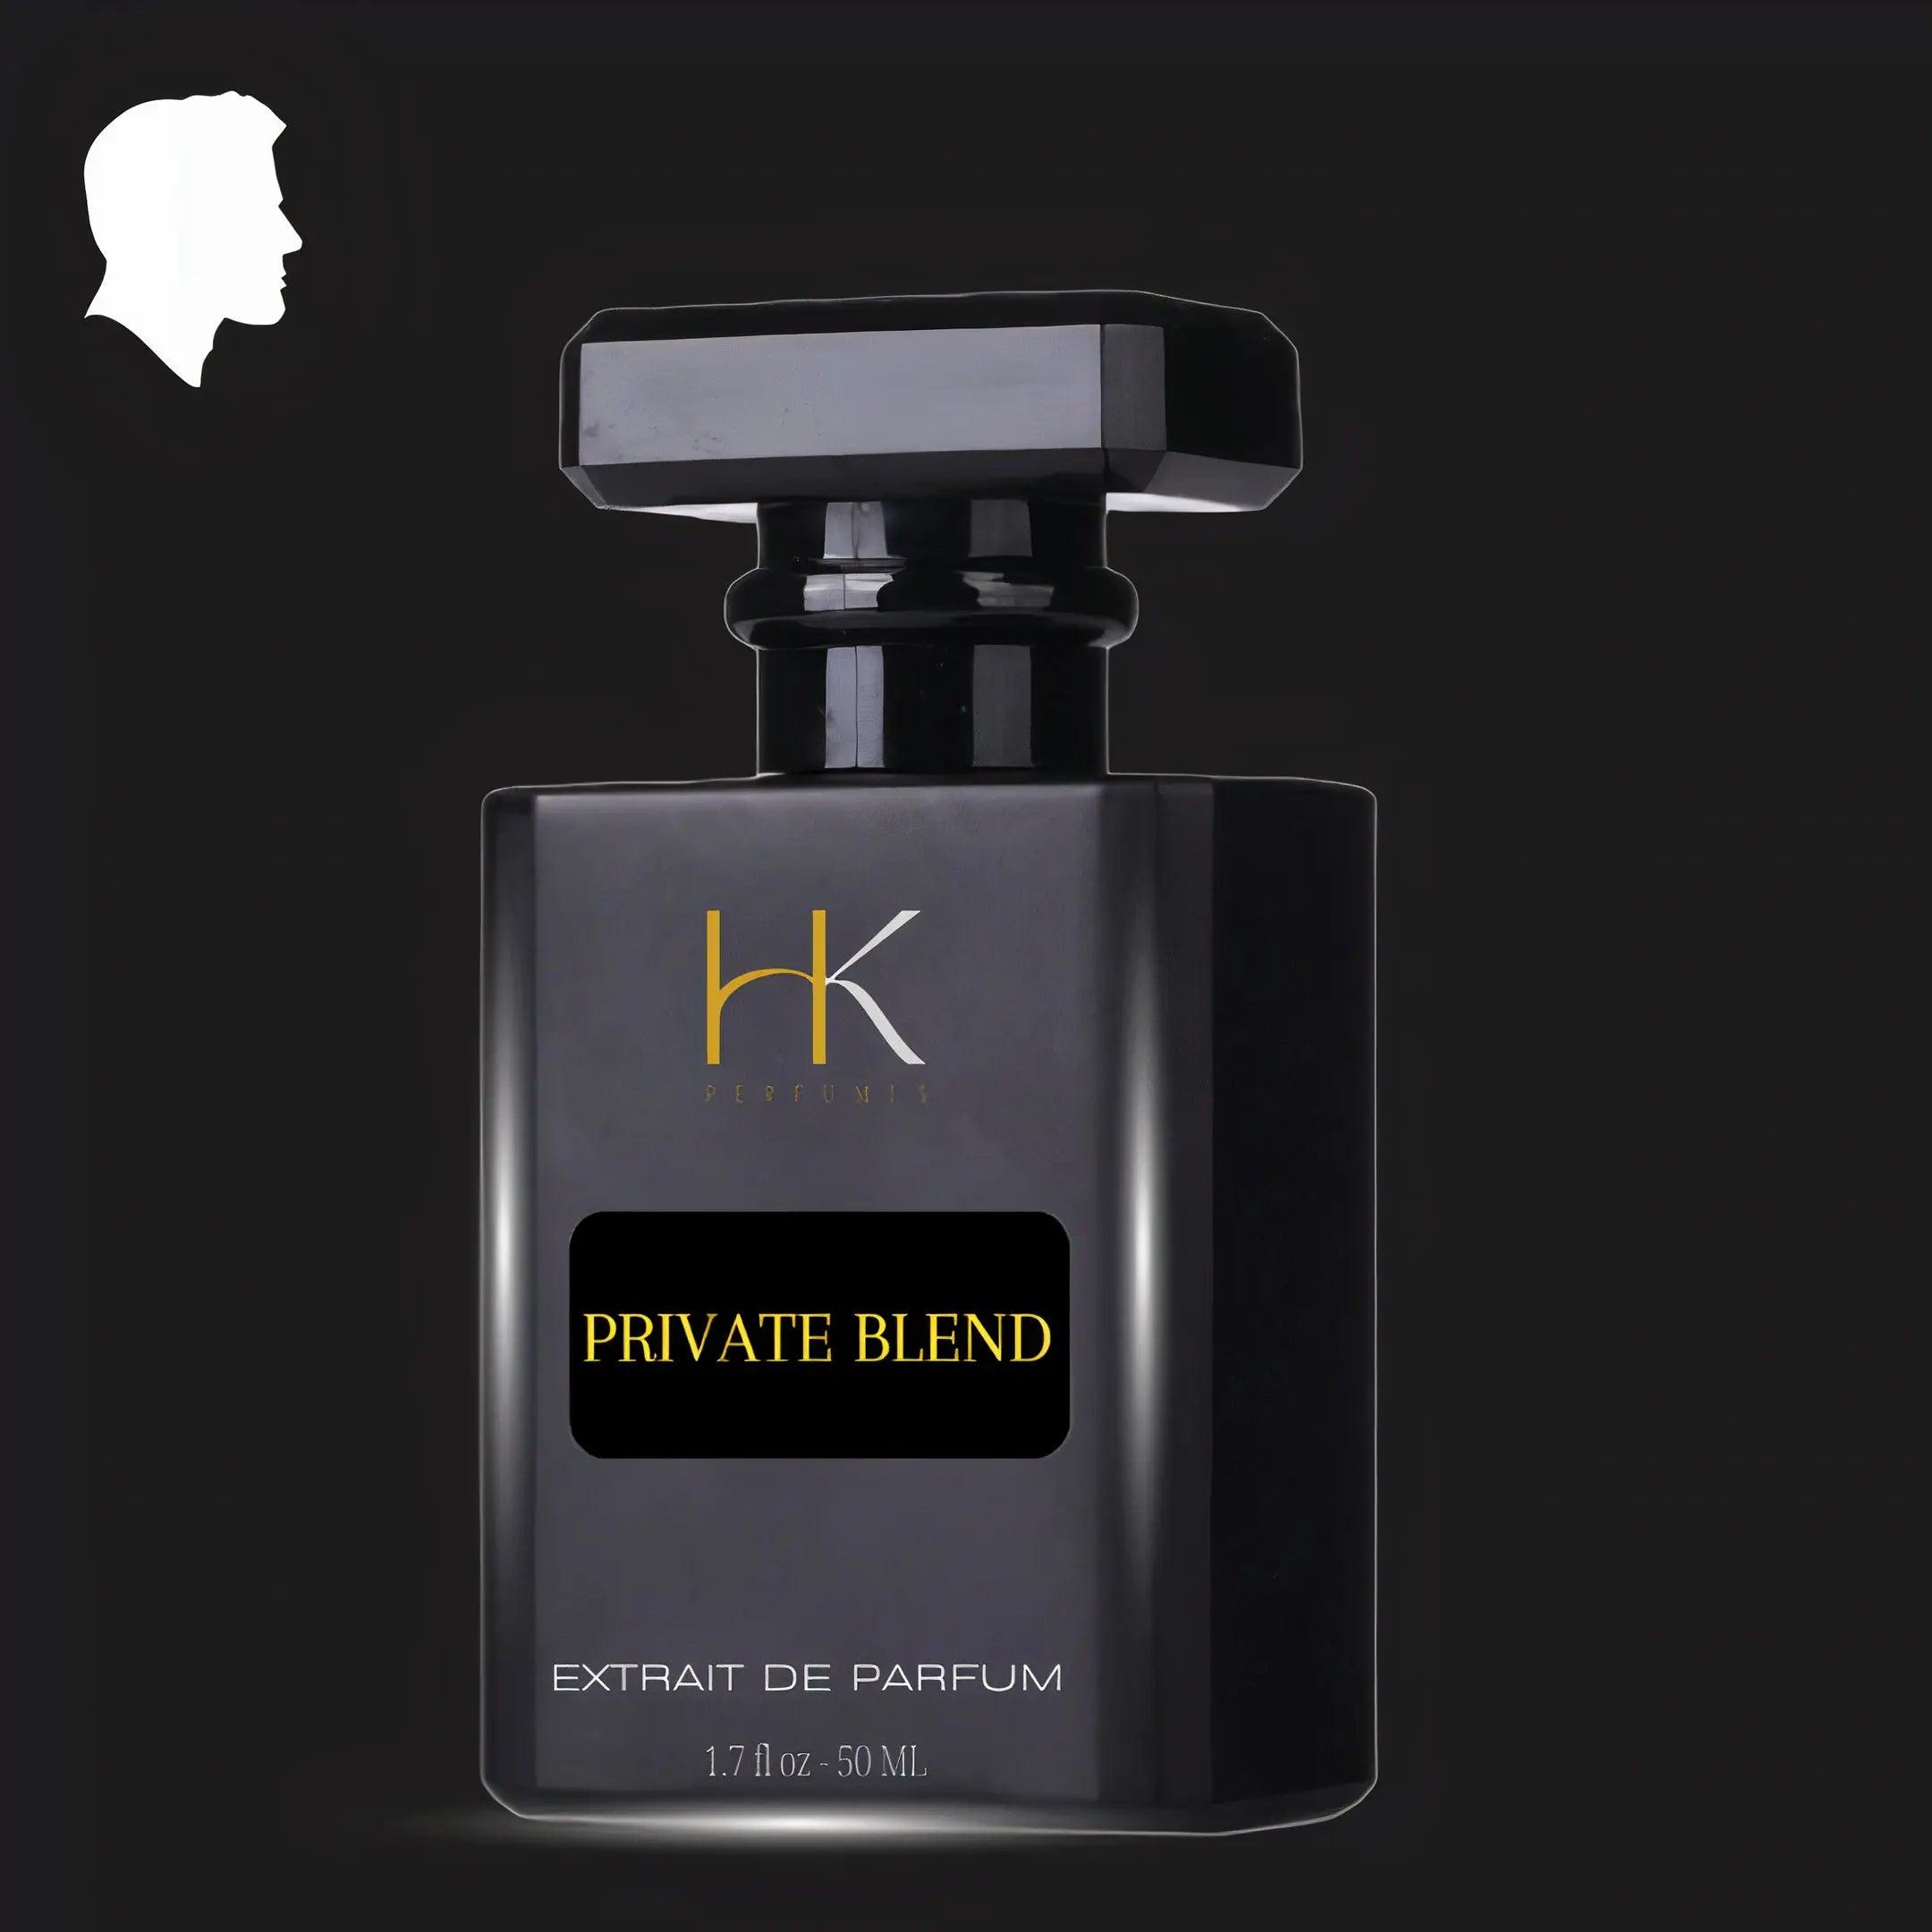 PRIVATE BLEND | HK PERFUMES